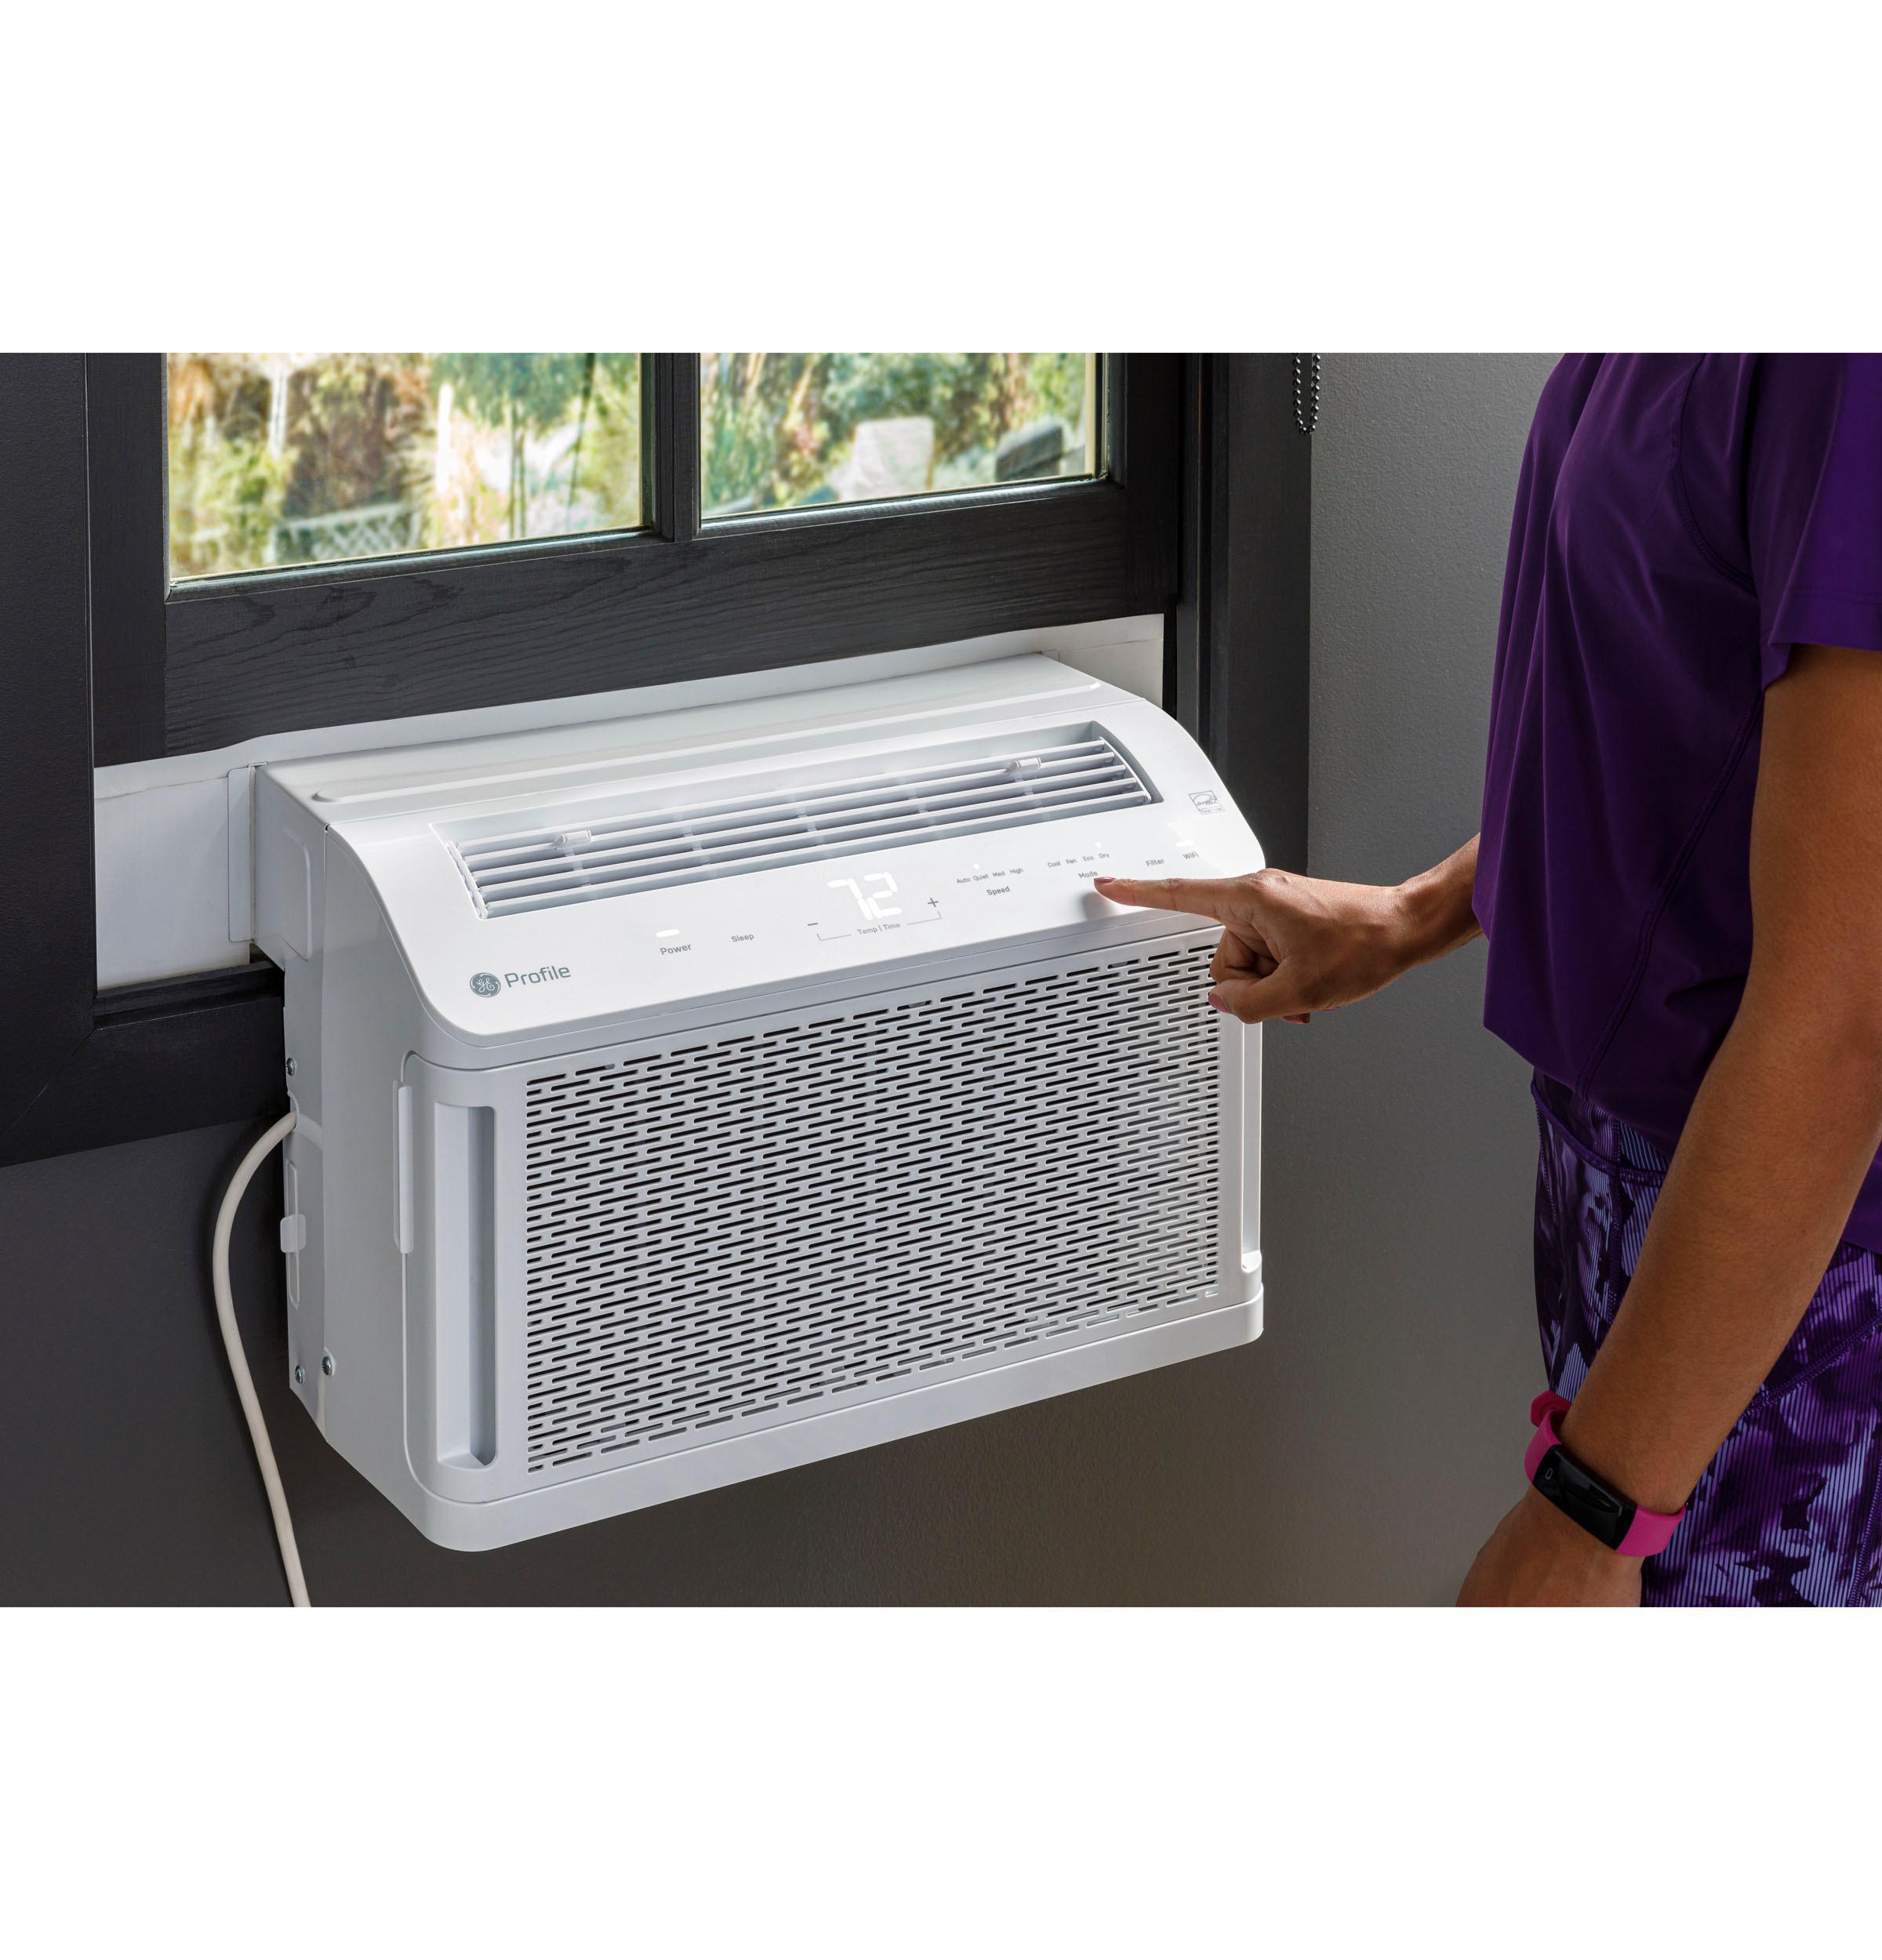 GE Profile ClearView™ ENERGY STAR® 10,300 BTU Inverter Smart Ultra Quiet Window Air Conditioner for Medium Rooms up to 450 sq. ft.